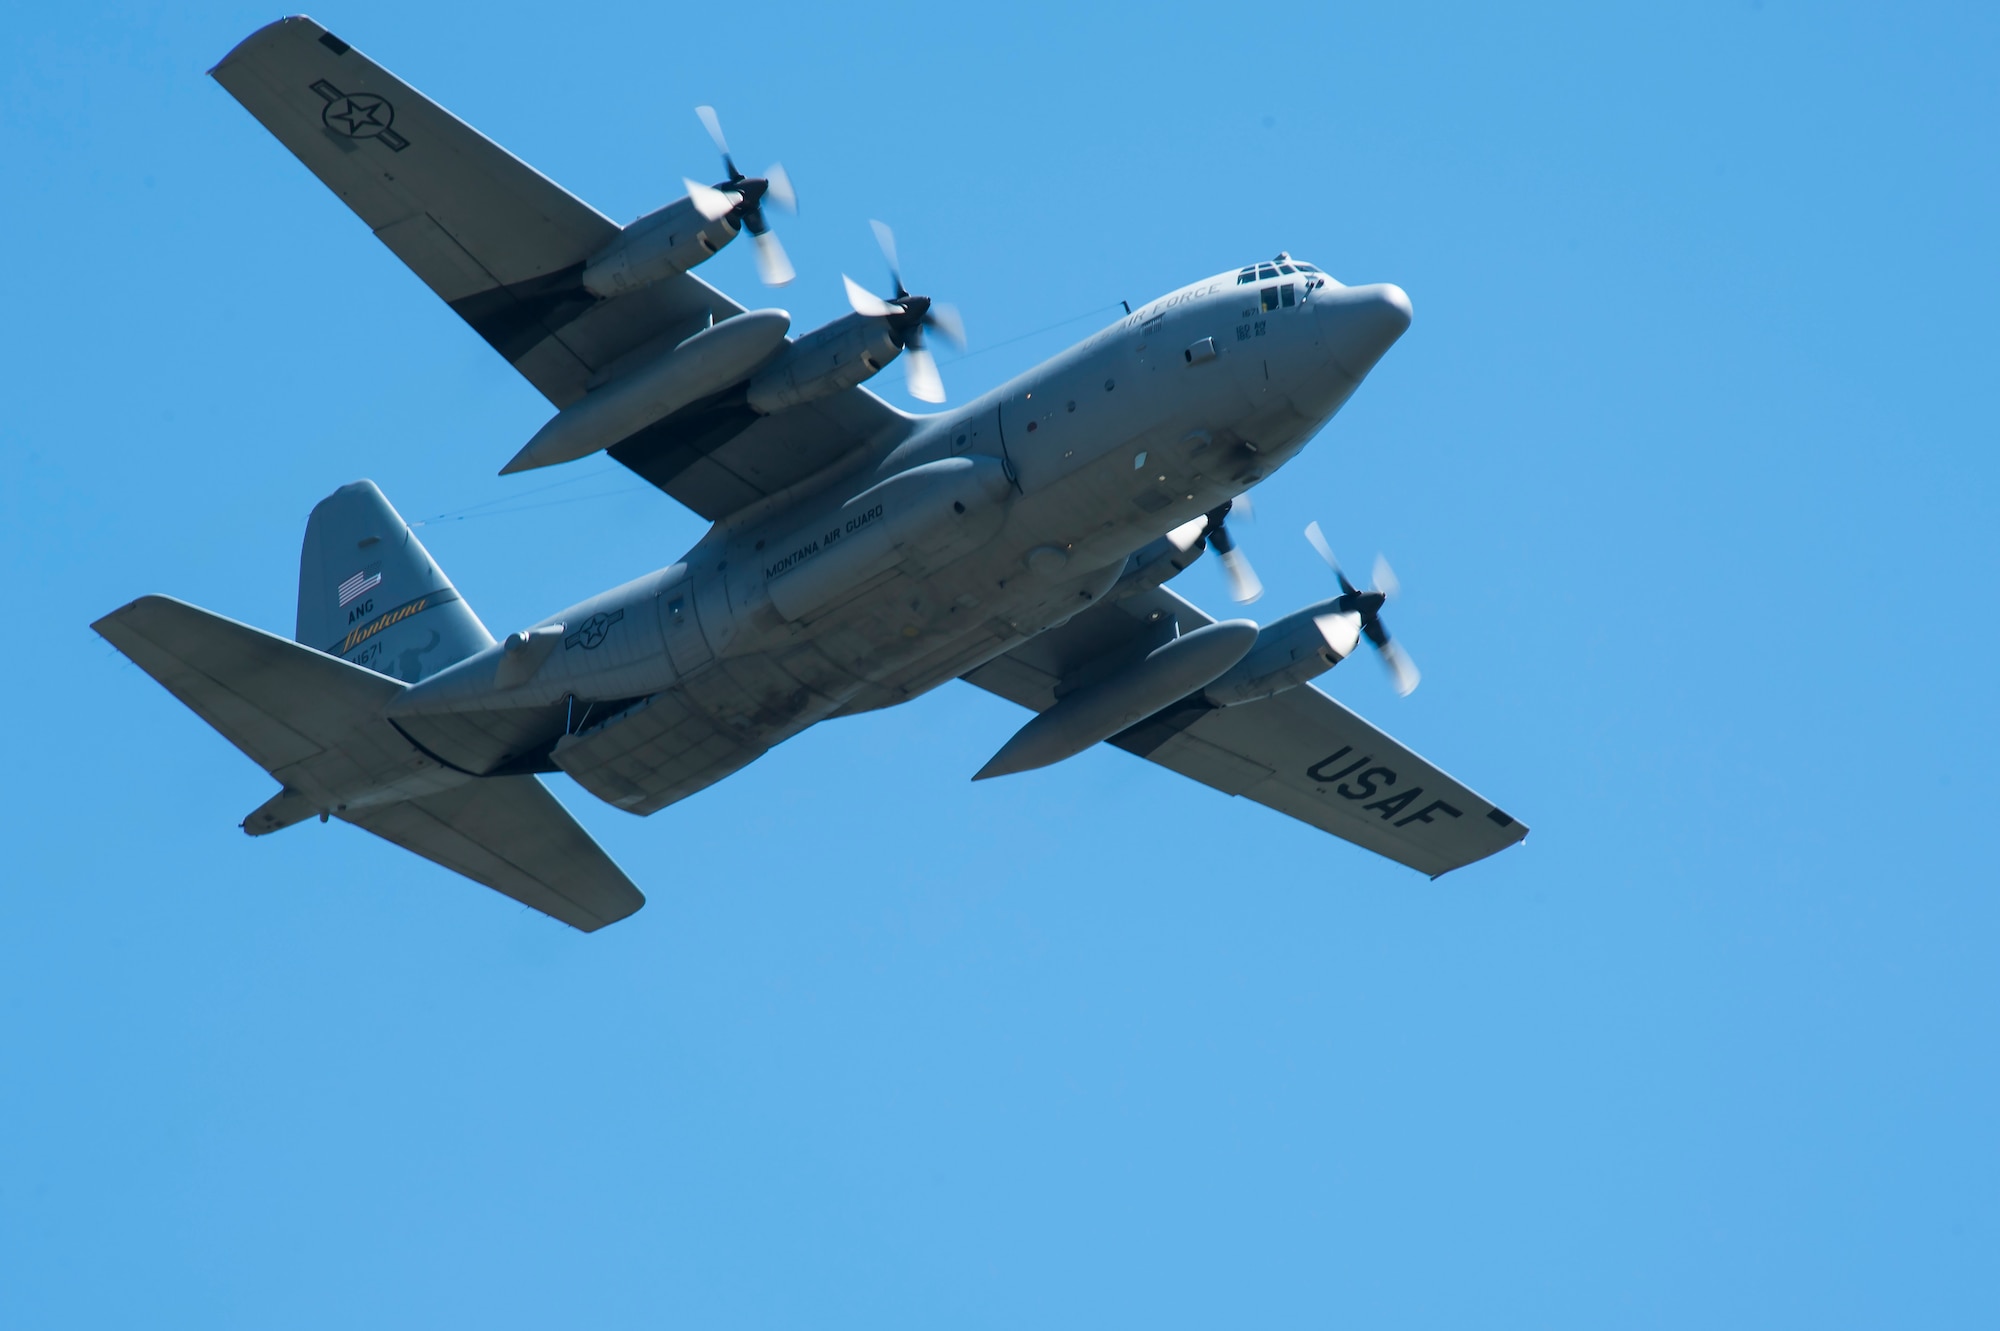 A C-130 Hercules transport aircraft from the Montana Air National Guard 120th Airlift Wing flies over the flight line May 29, 2019, at Malmstrom Air Force Base, Mont.